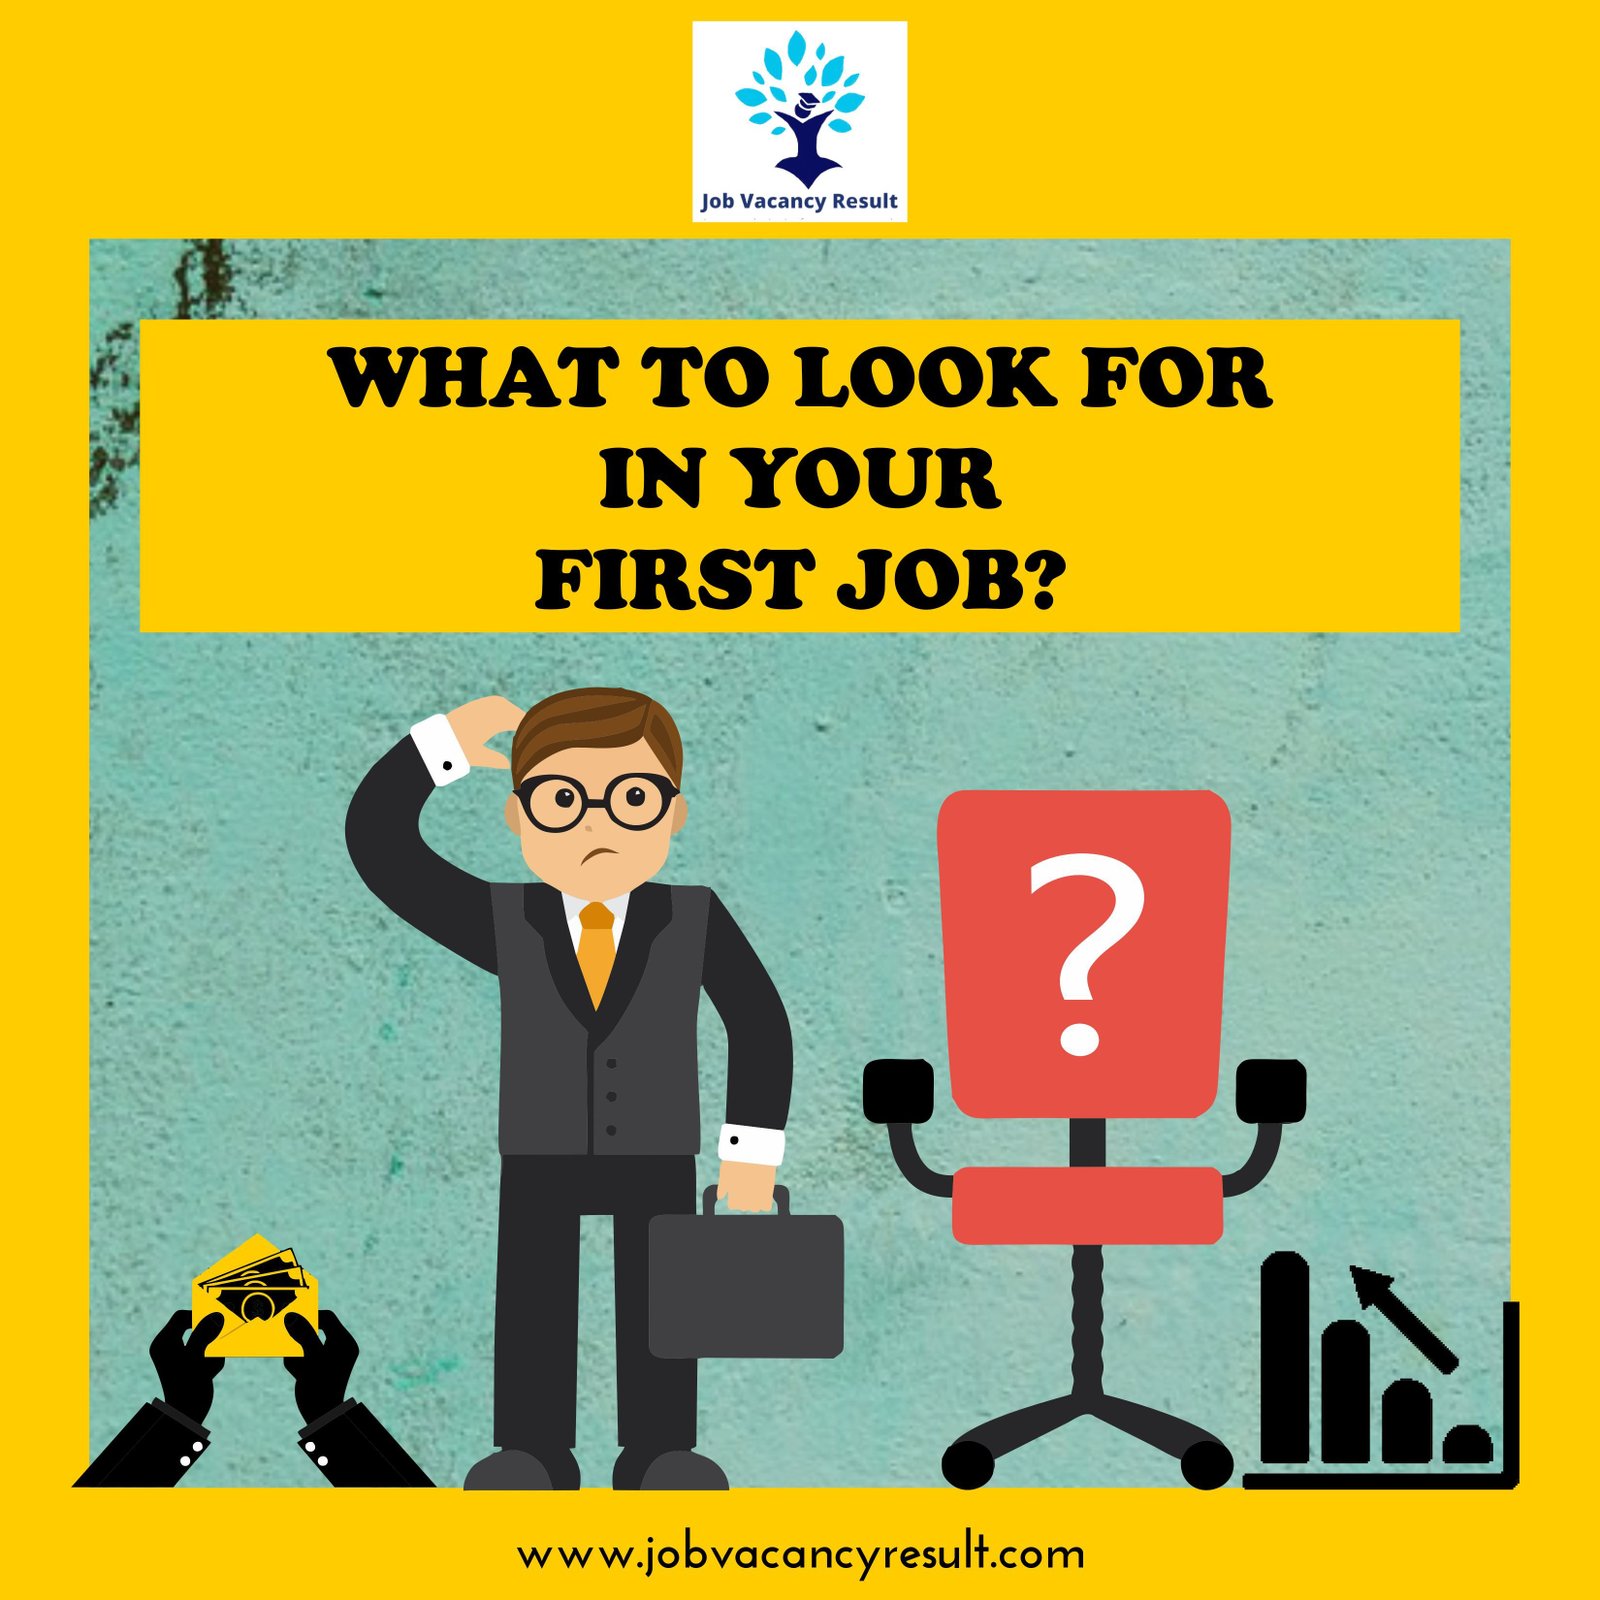 What to look for in your first job?